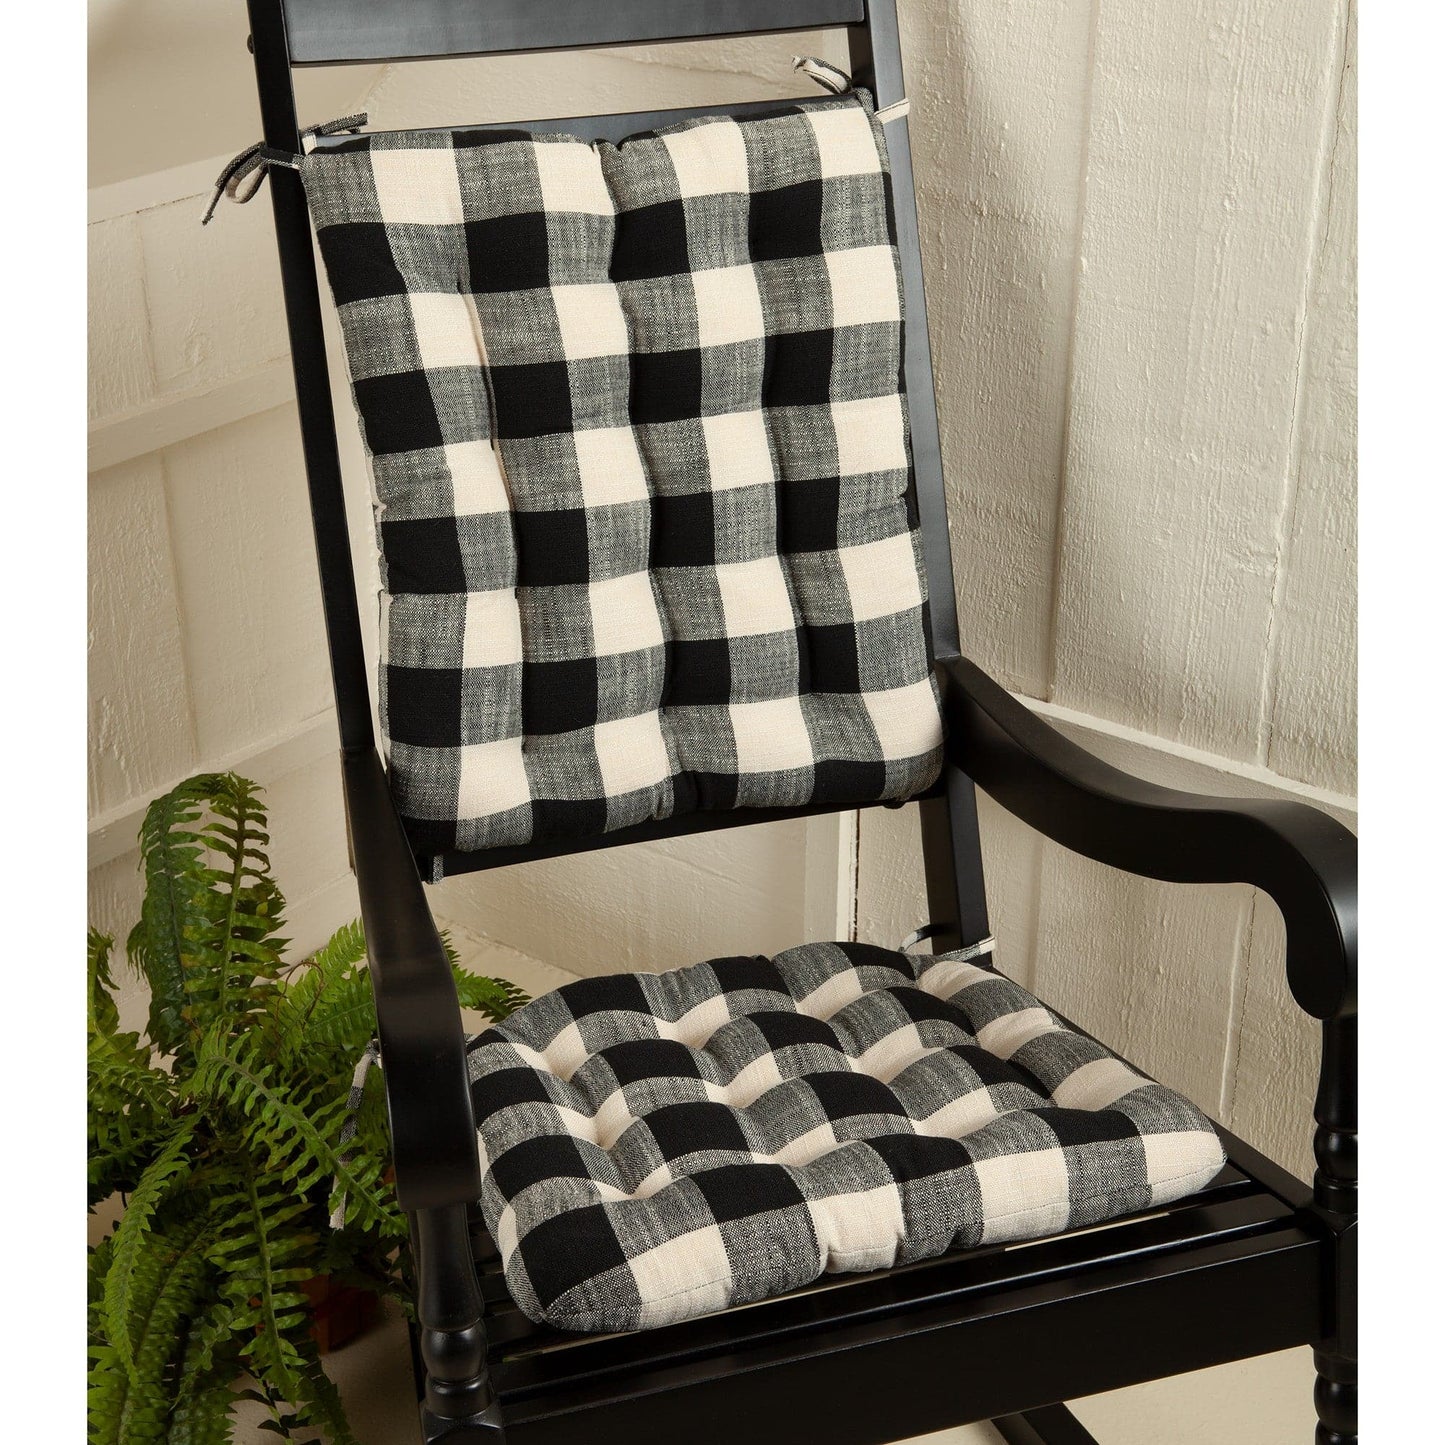 Large Check Black and Cream Rocking Chair Cushion Pads